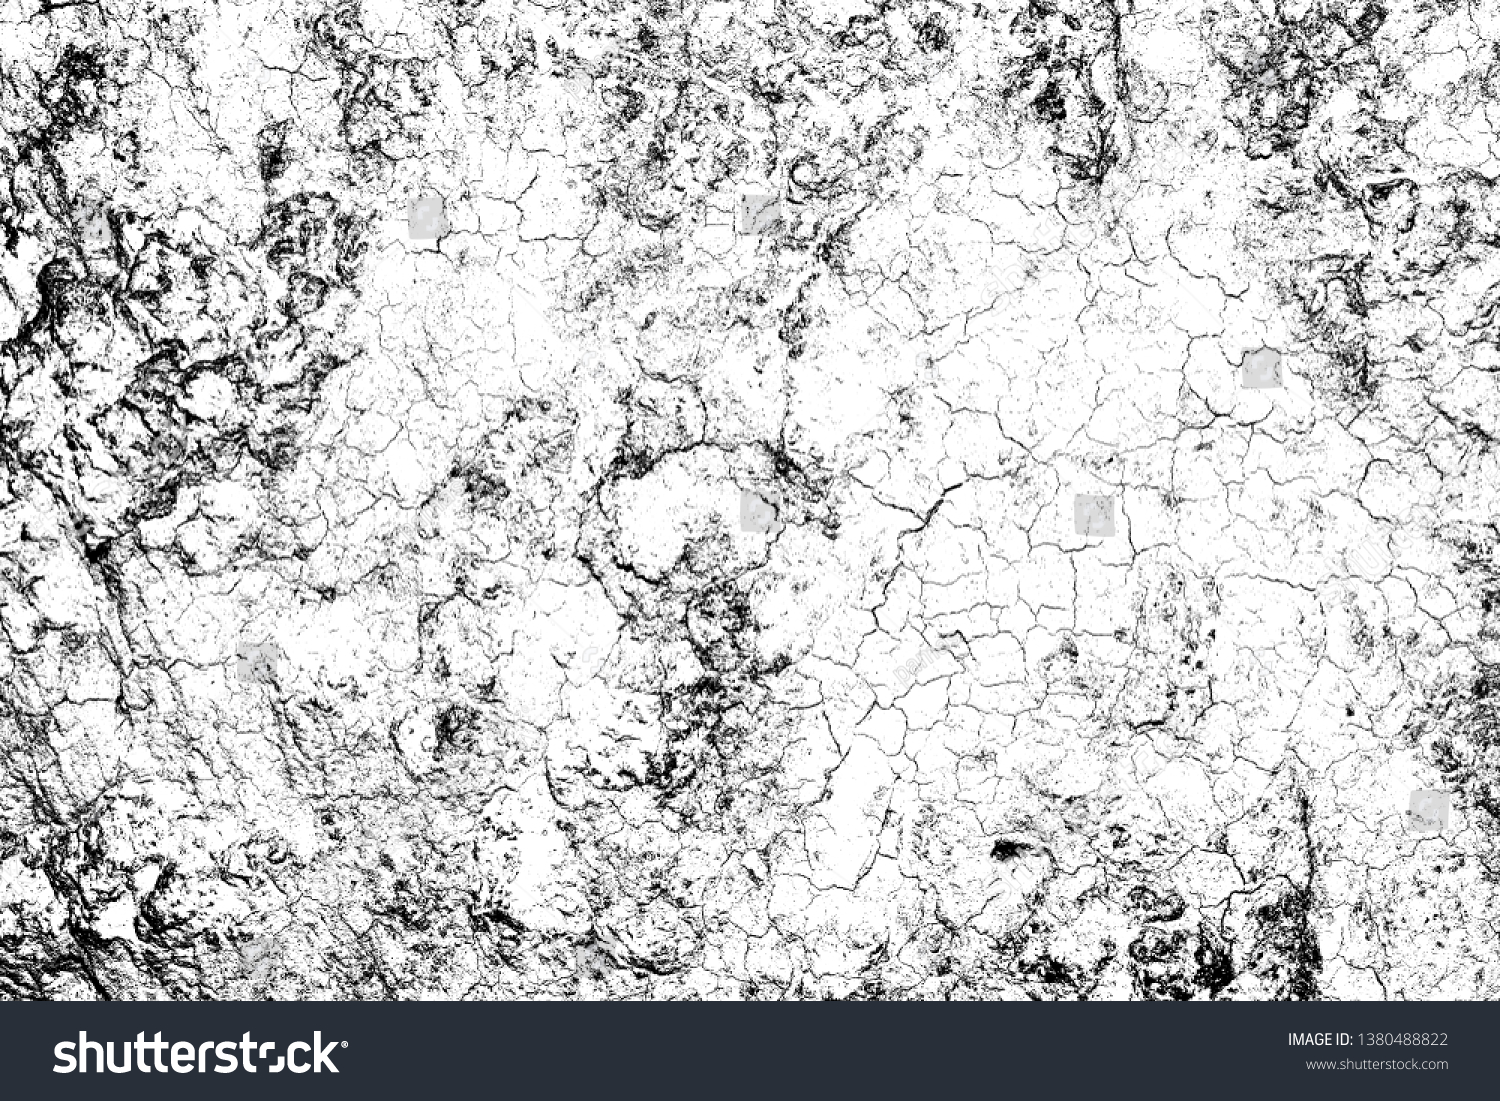 top view cracked soil ground Earth texture on white background, desert cracks,Dry surface Arid in drought land, floor has many grooves and scratches. The distressed has been shown to last a long time. #1380488822